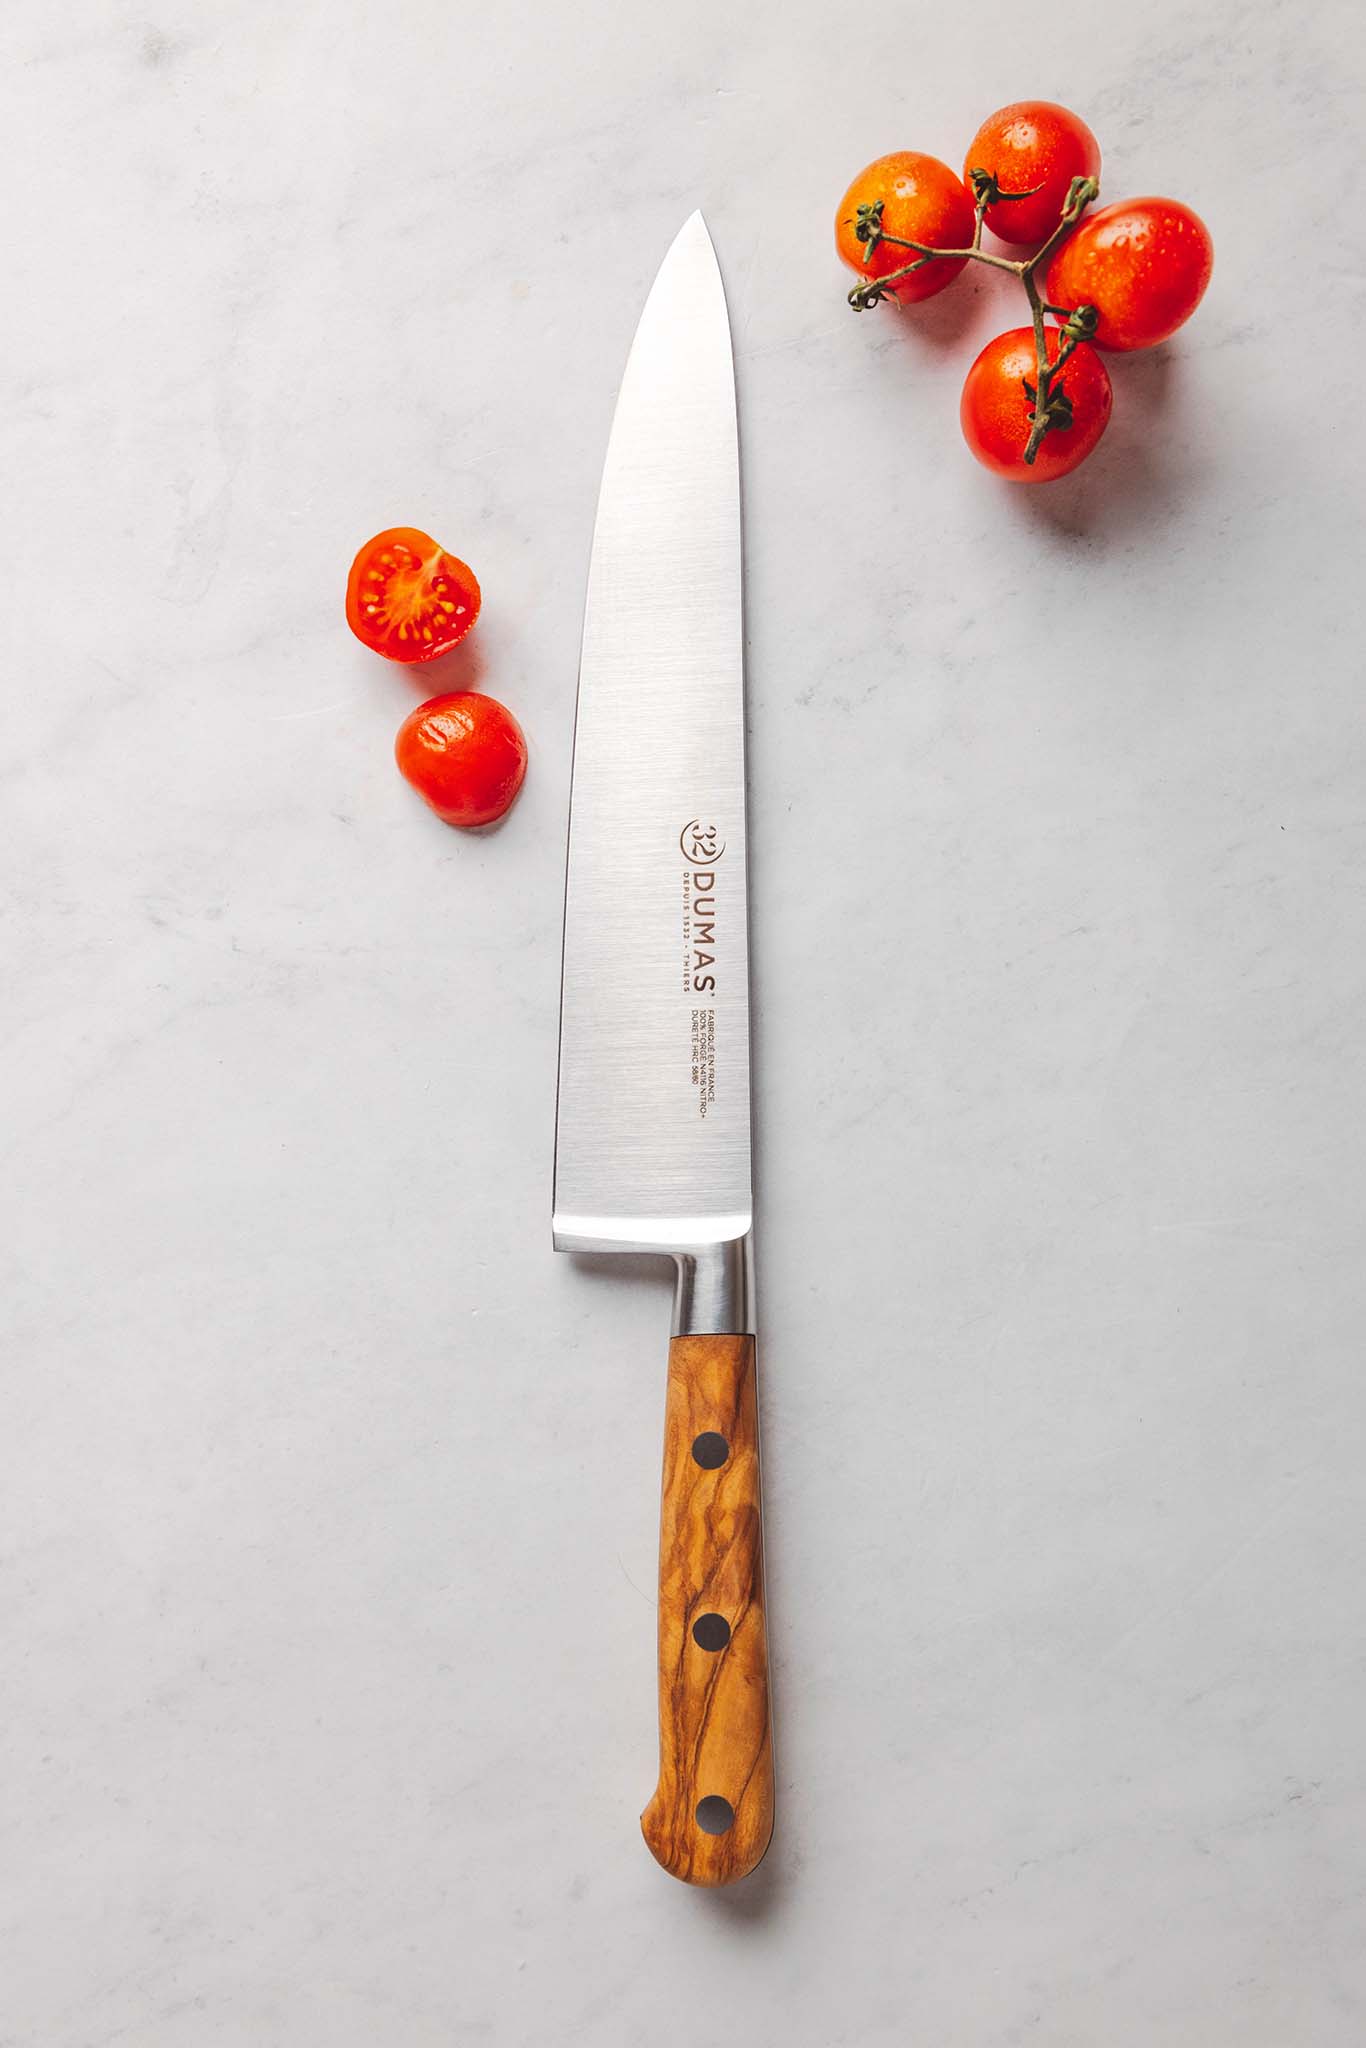 Chef Knife 8&quot; by 32 Dumas